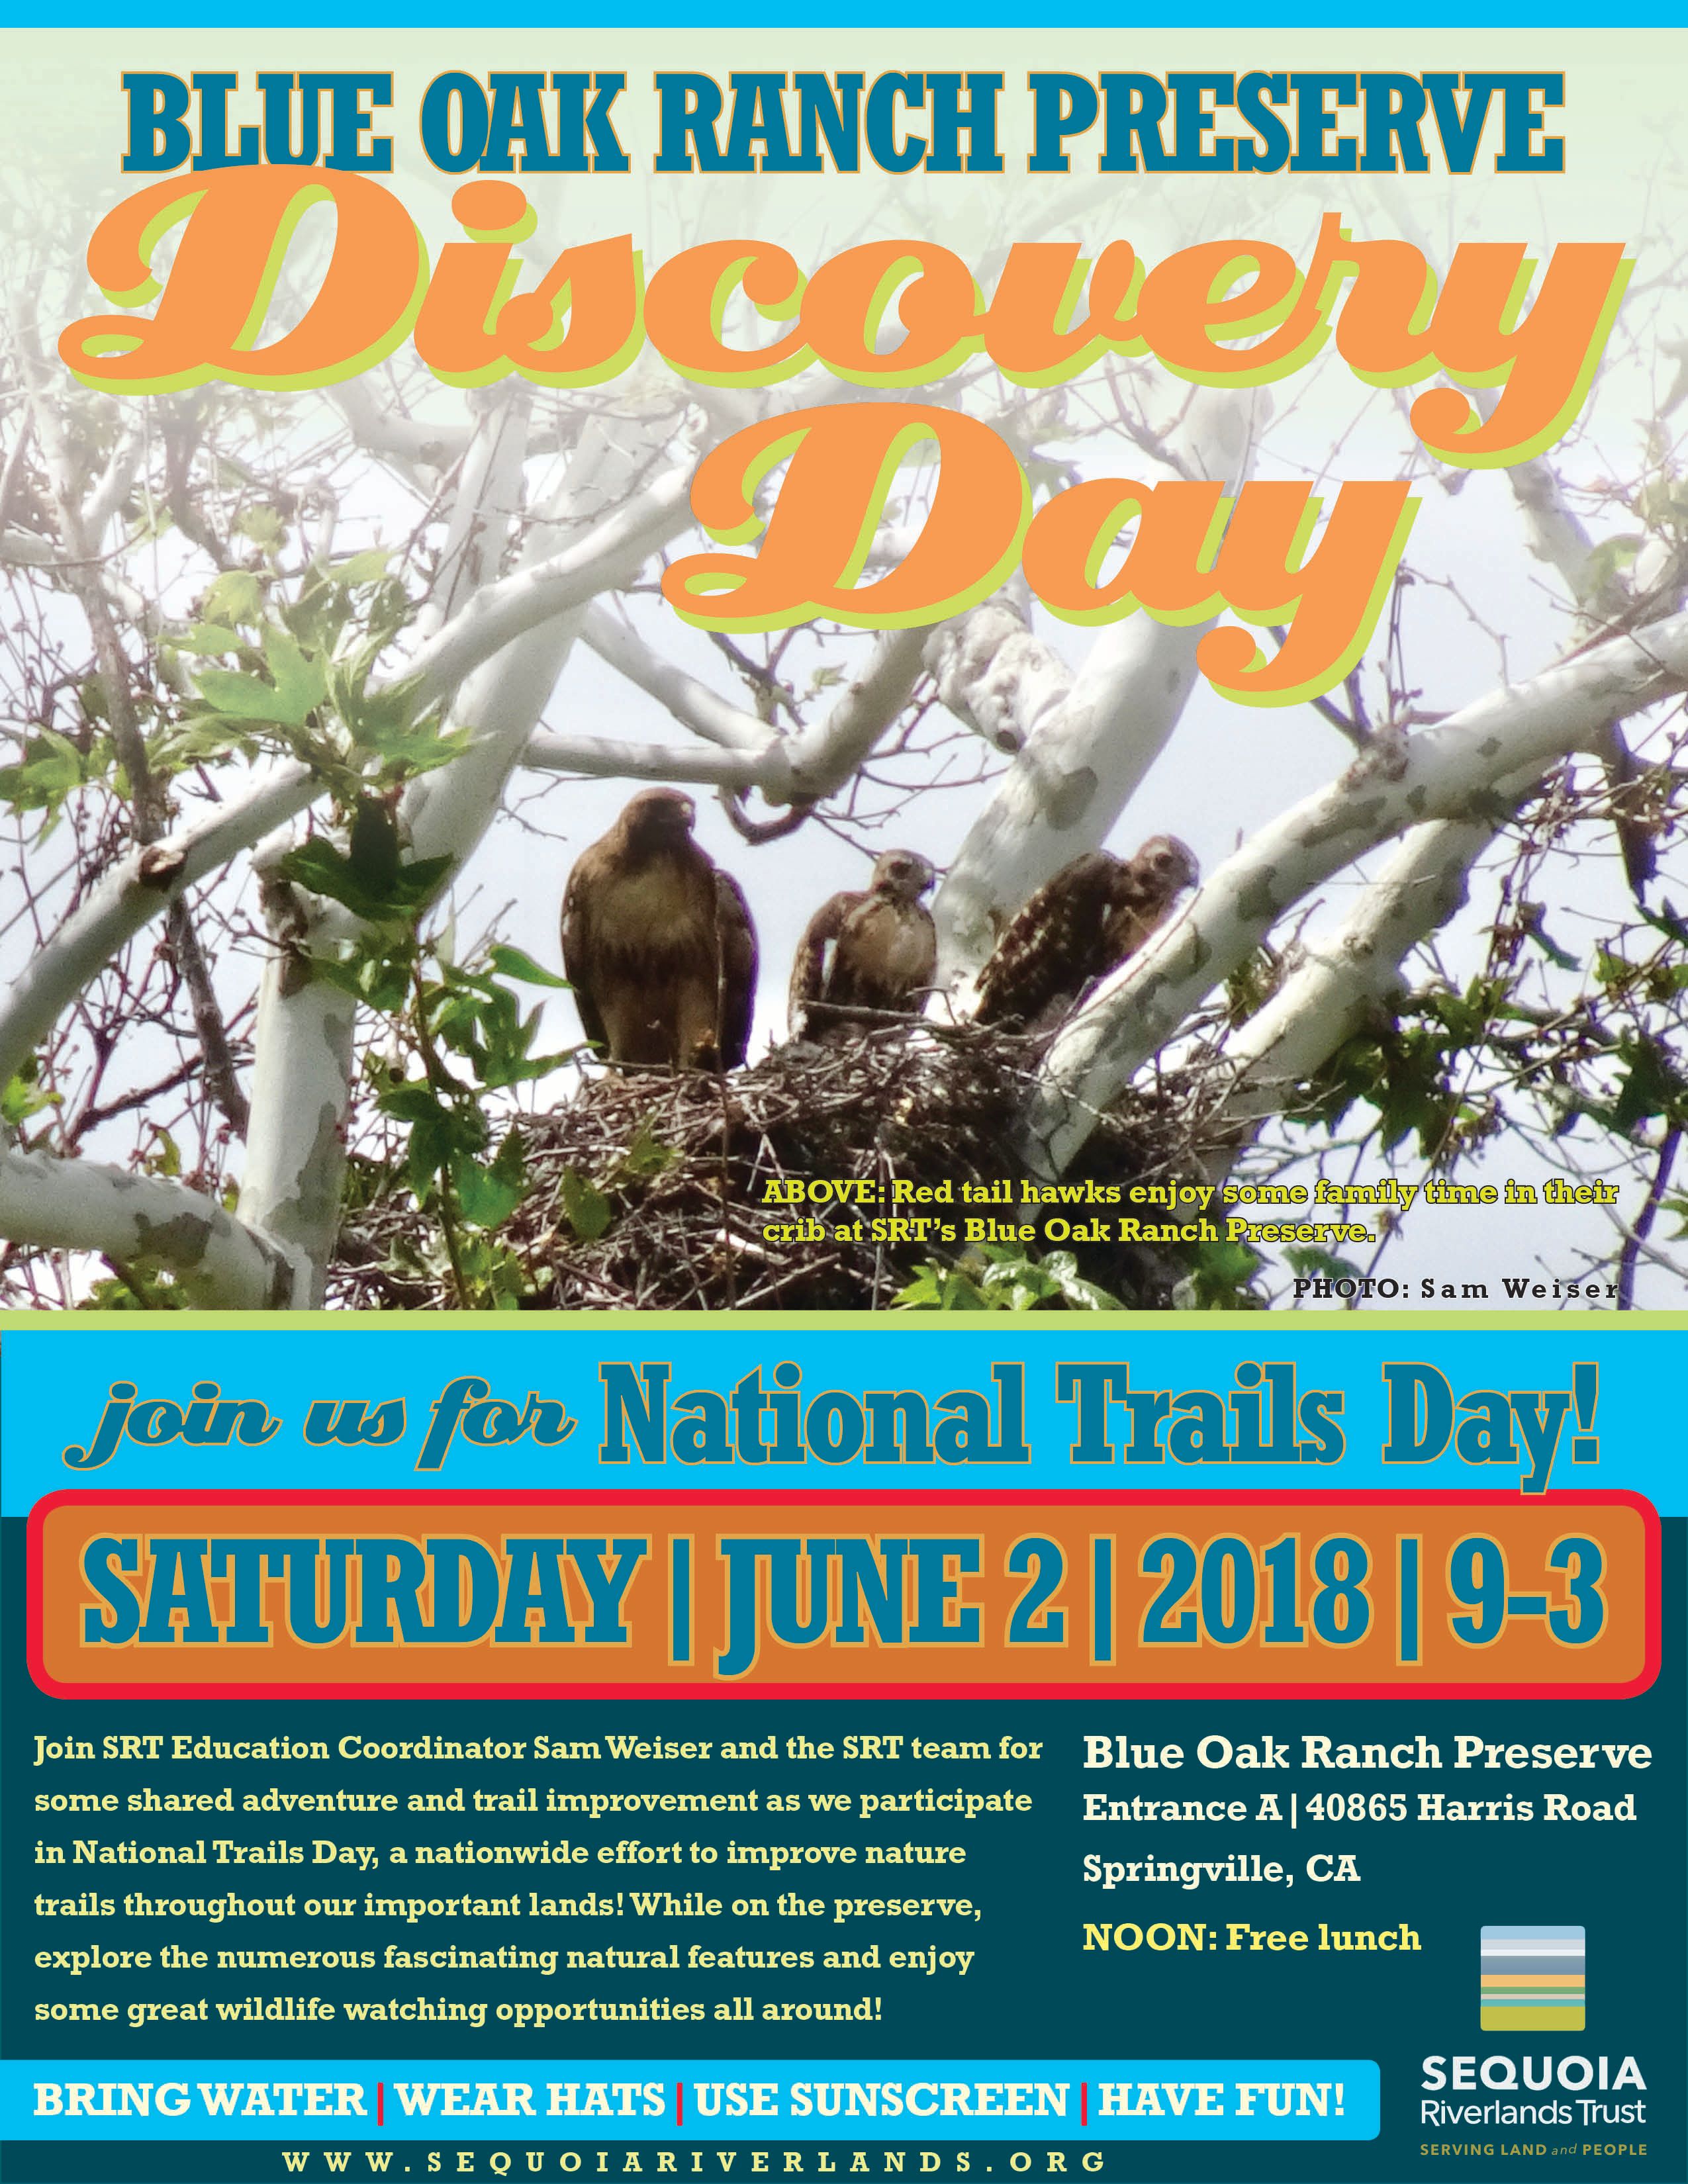 Final Blue Oak Discovery Day this Saturday 6-2-18